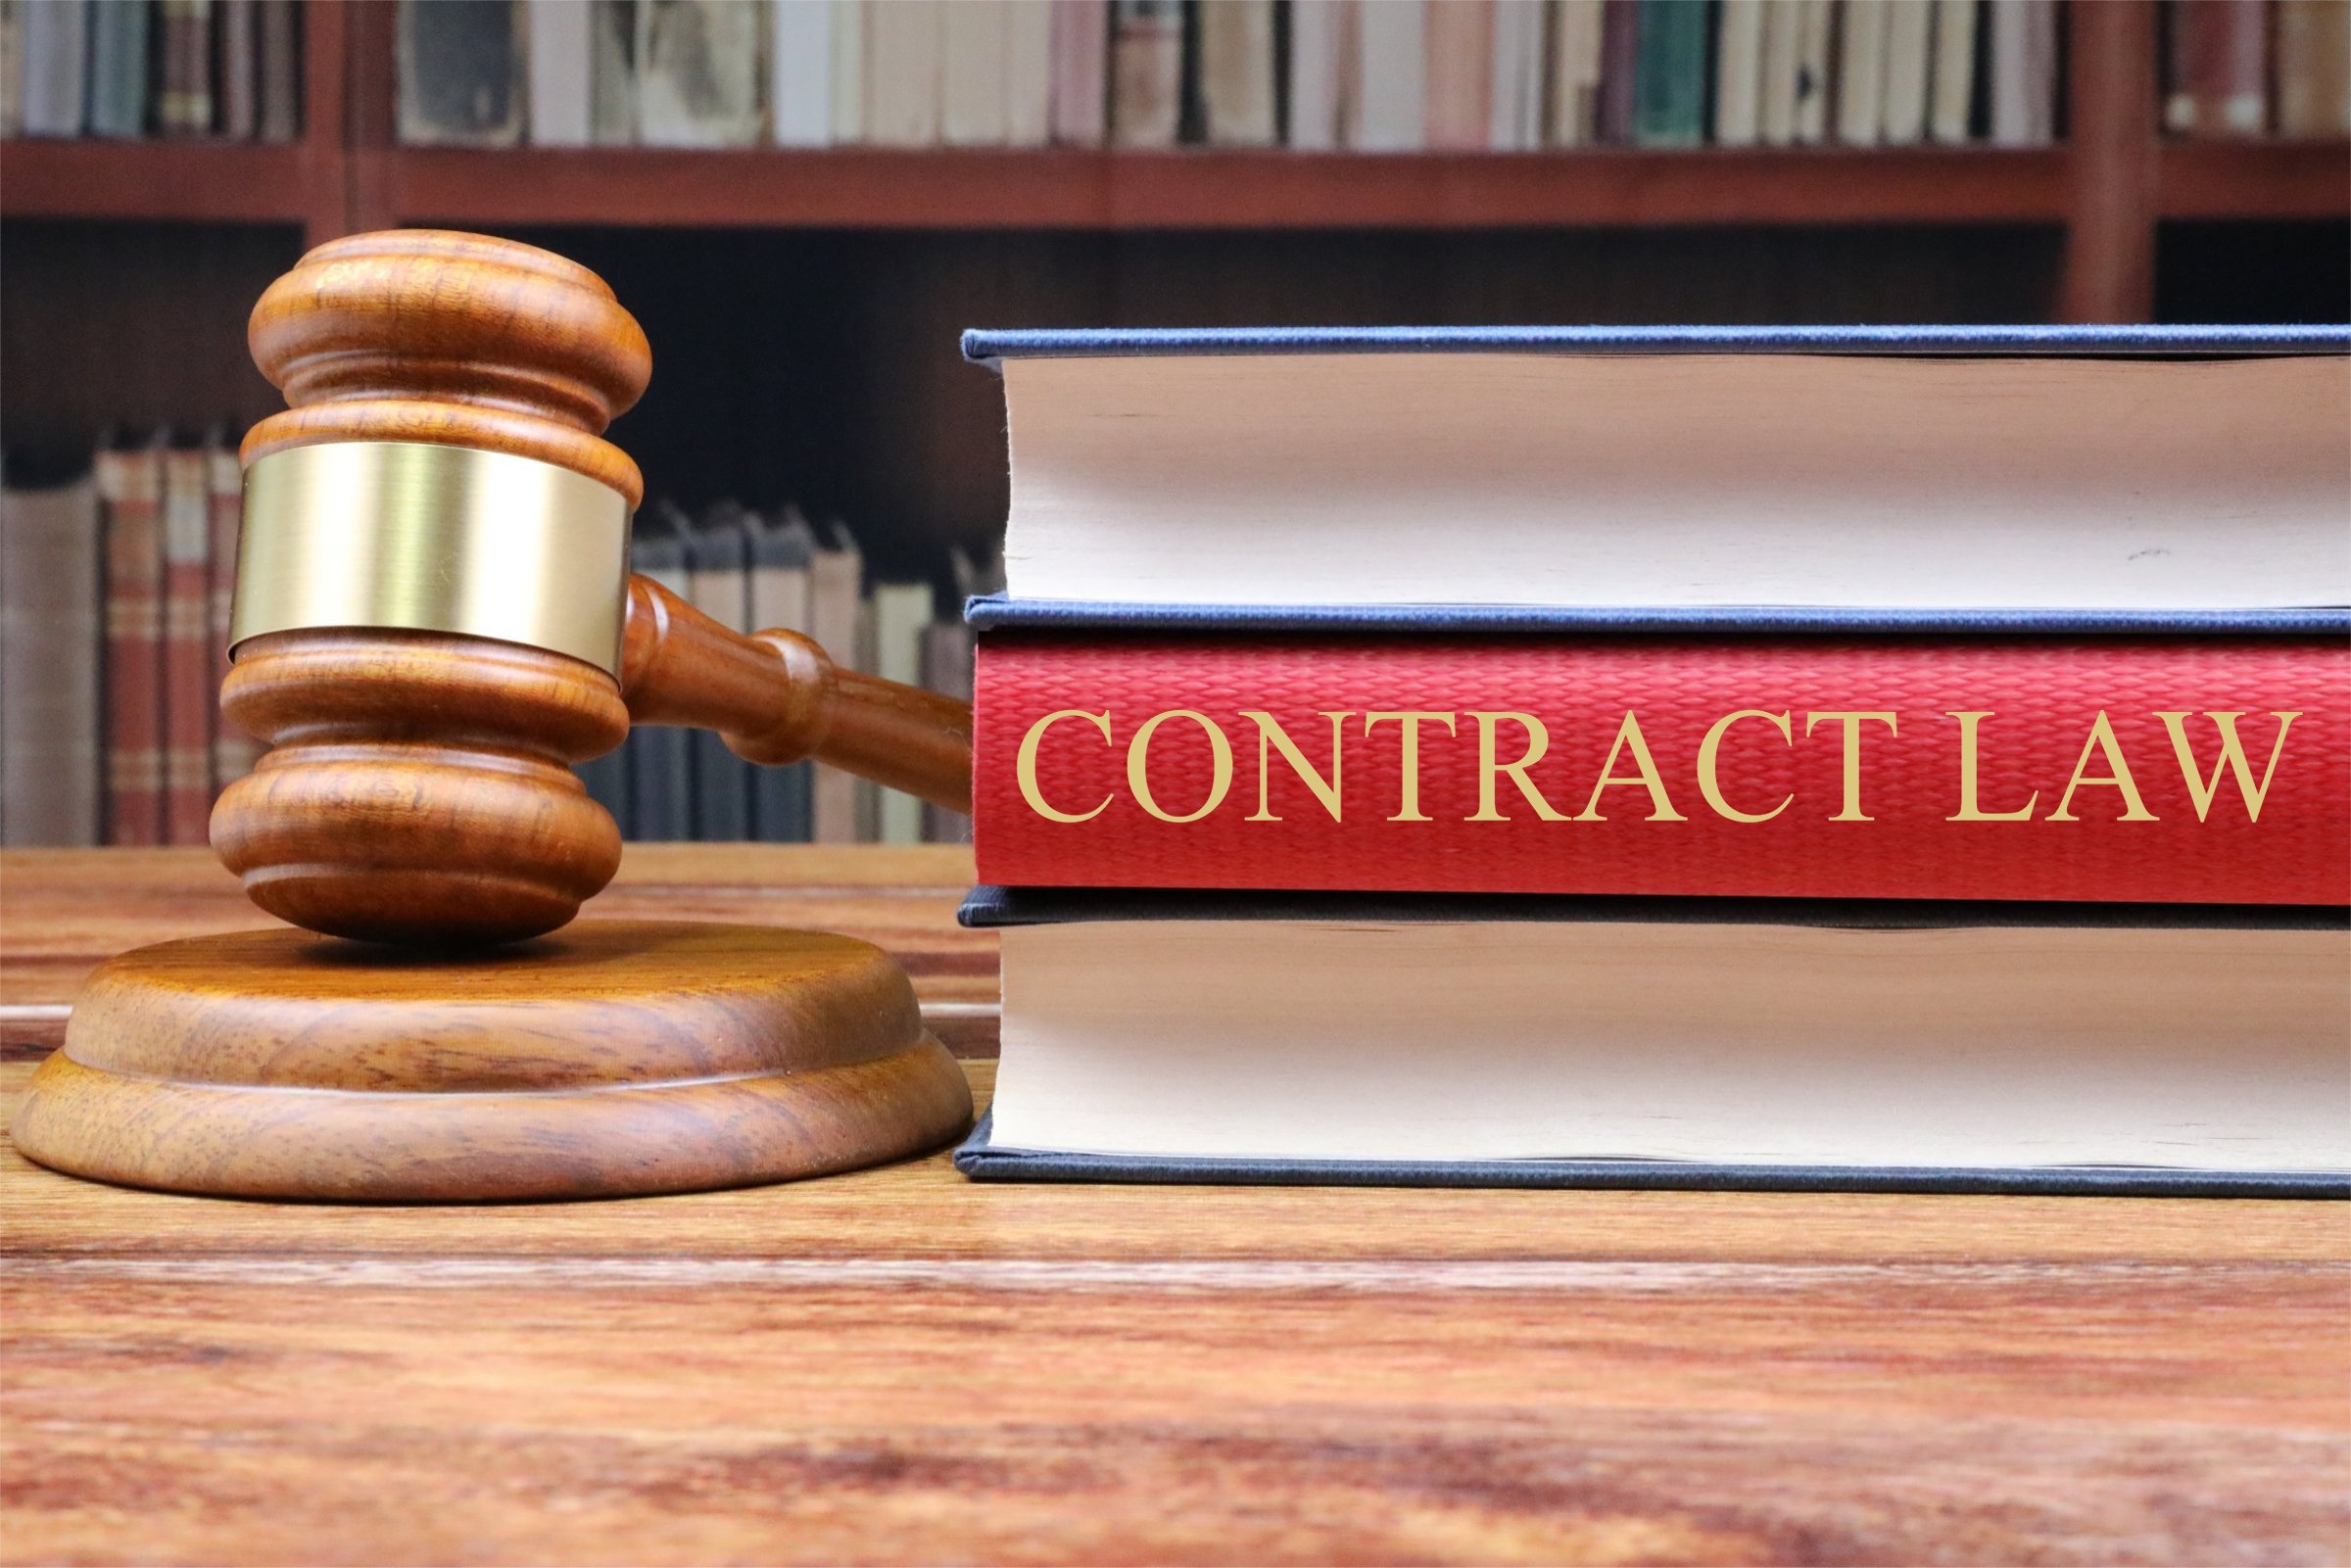 Contract Law - Free of Charge Creative Commons Legal 8 image